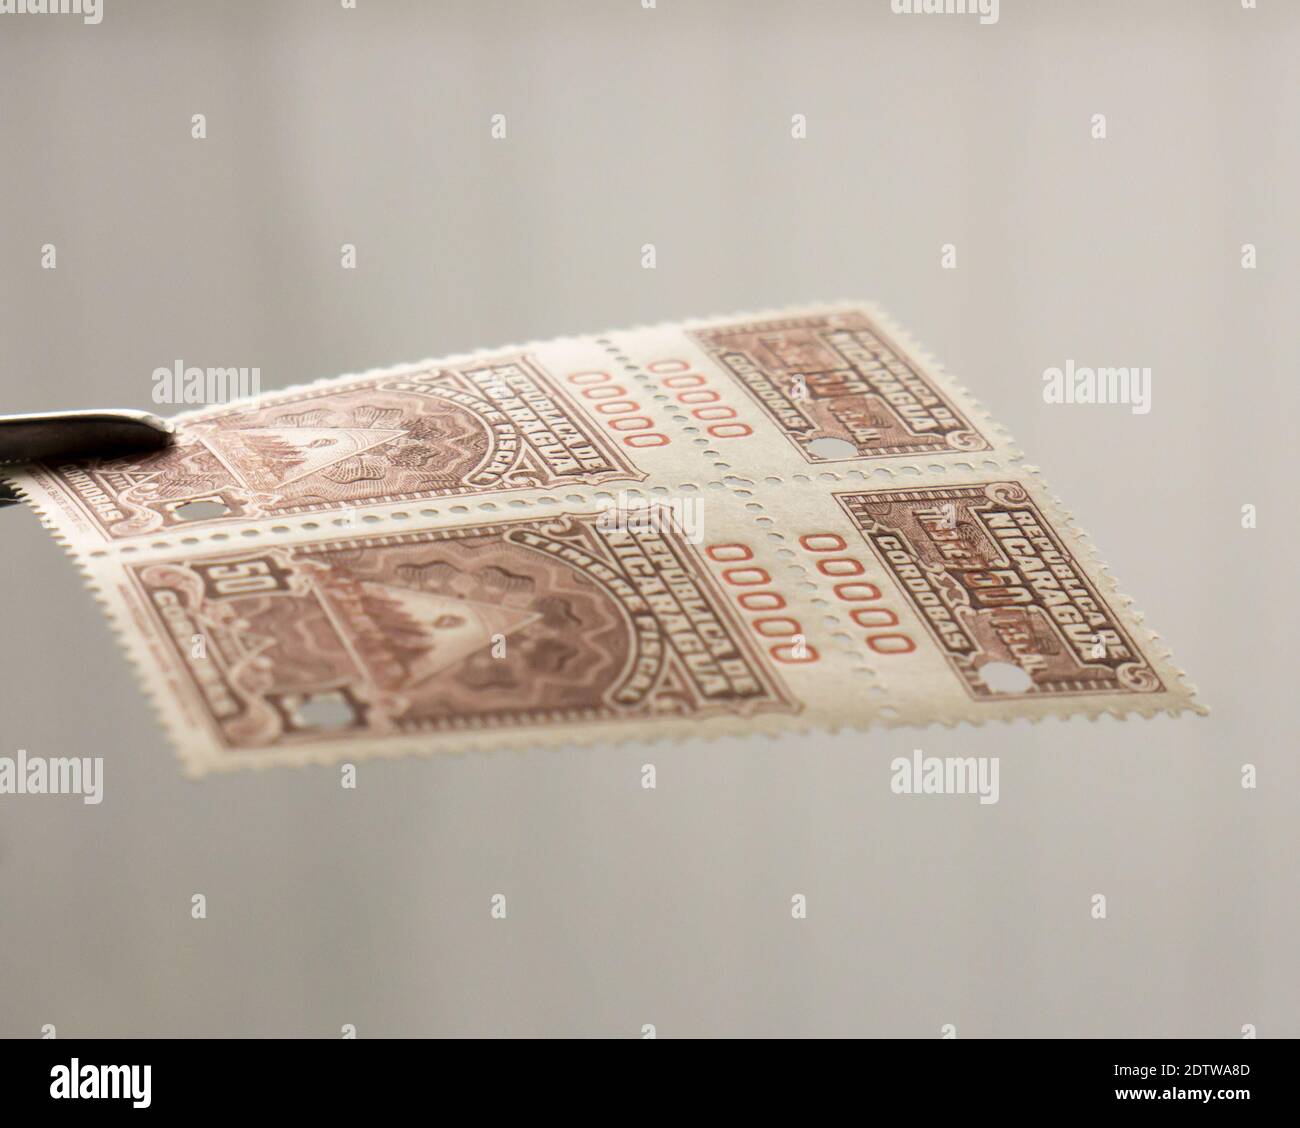 GOMEL, BELARUS, 22 DECEMBRE 2020, Stamp printed in Nicaragua shows image of the Timbre Fiscal, circa 1950. Stock Photo